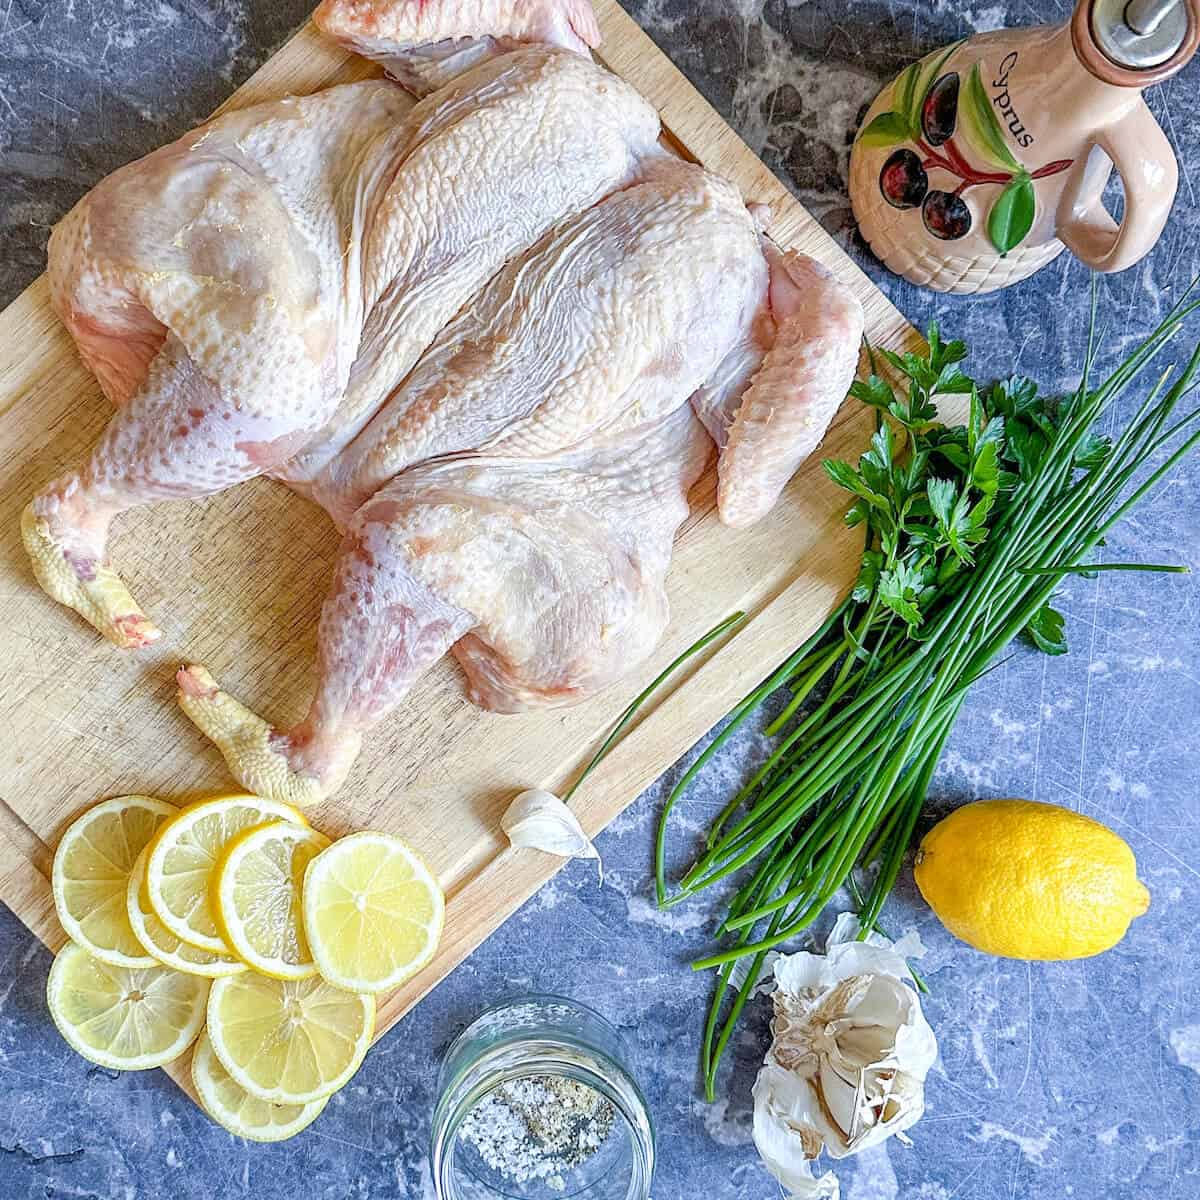 A spatchcock chicken on a chopping board next to some lemons, olive oil, garlic cloves and fresh herbs. 